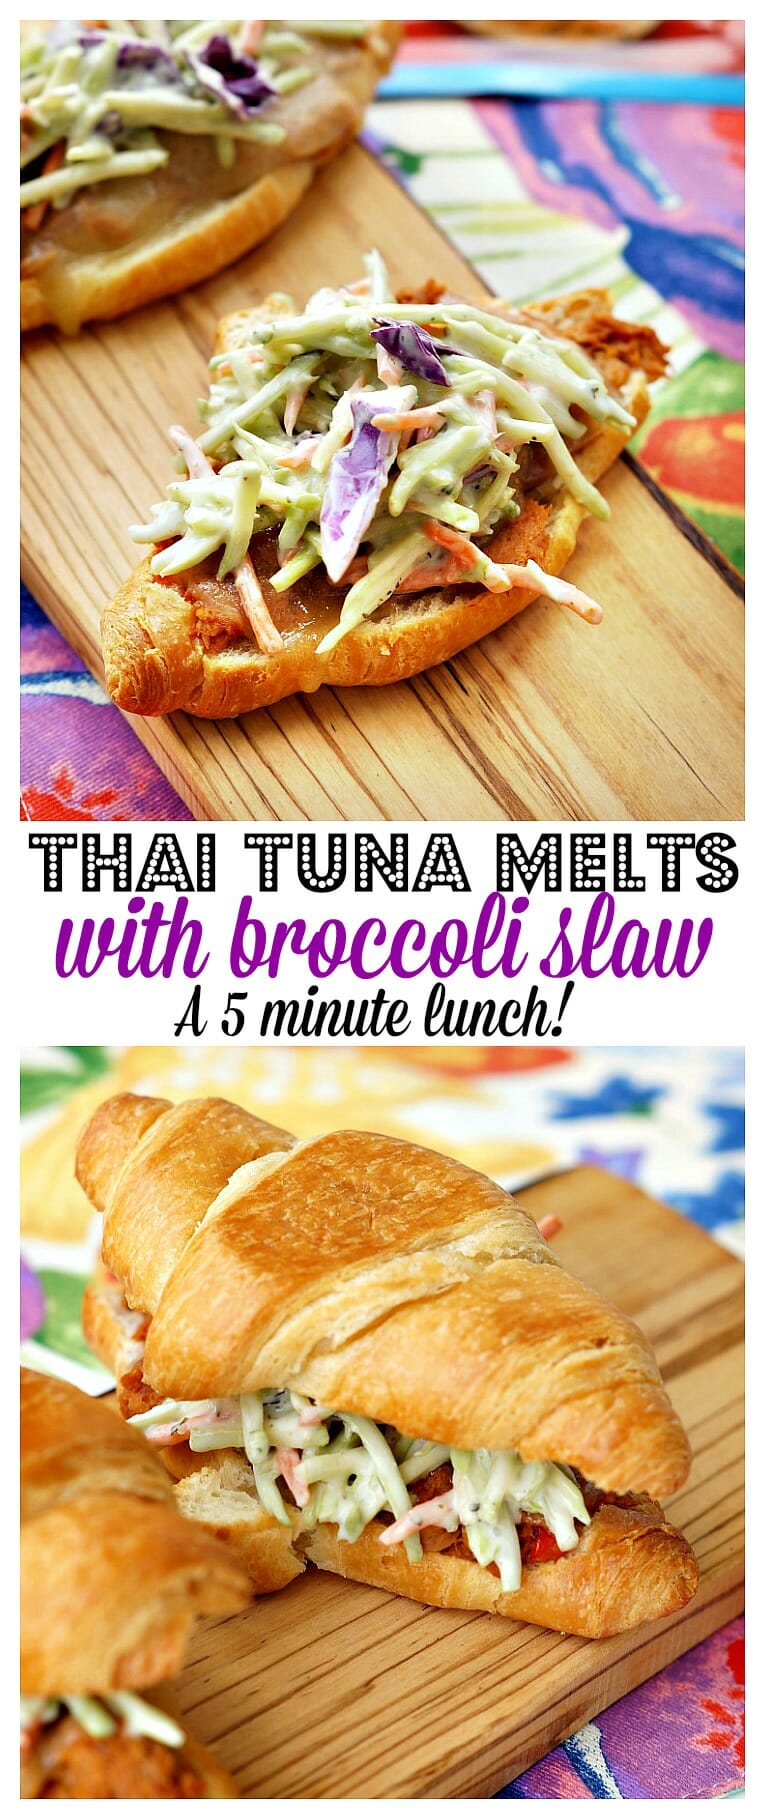 Thai Tuna Melts are a delicious take on the classic tuna melt! Served with broccoli slaw on an croissant, this lunch idea only takes 5 minutes to make!